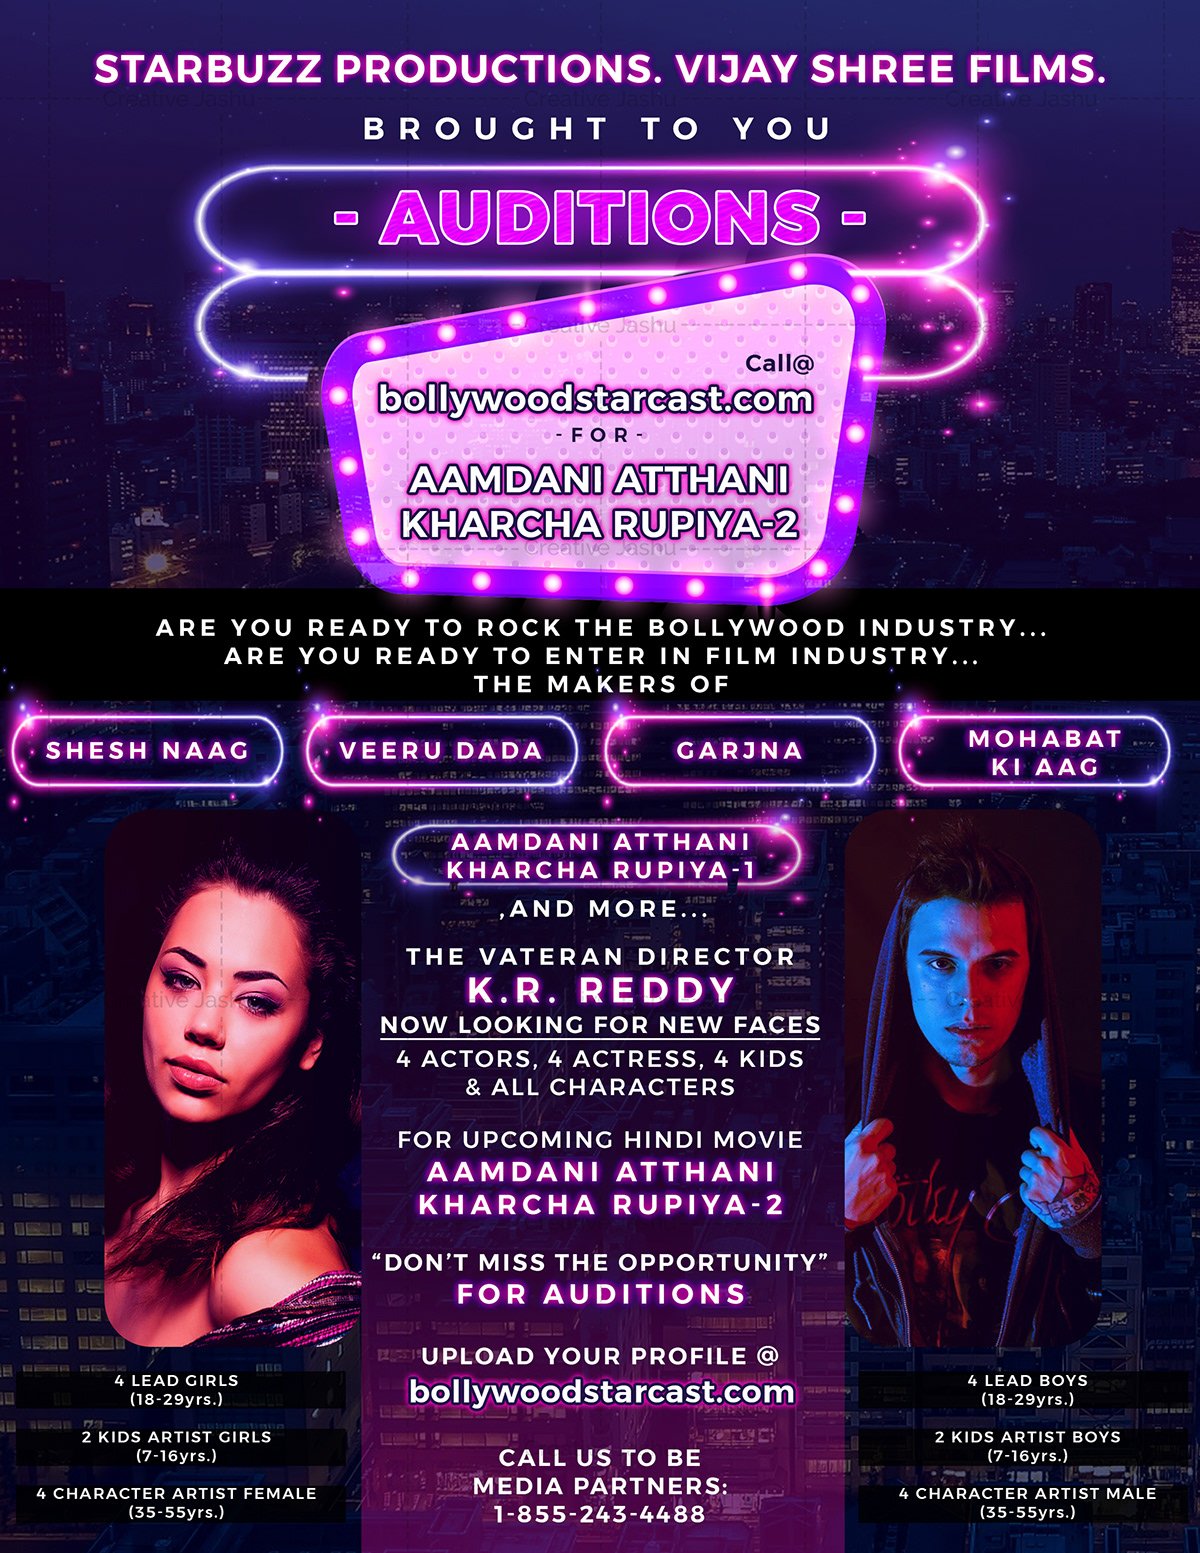 Film Audition Bollywood Movie Poster Open Audition Flyer Graphics Designing Adobe Photoshop editing Promotional/Advertising Flyer professional designs Social media post Bollywood Industry Upcoming Film/Movie